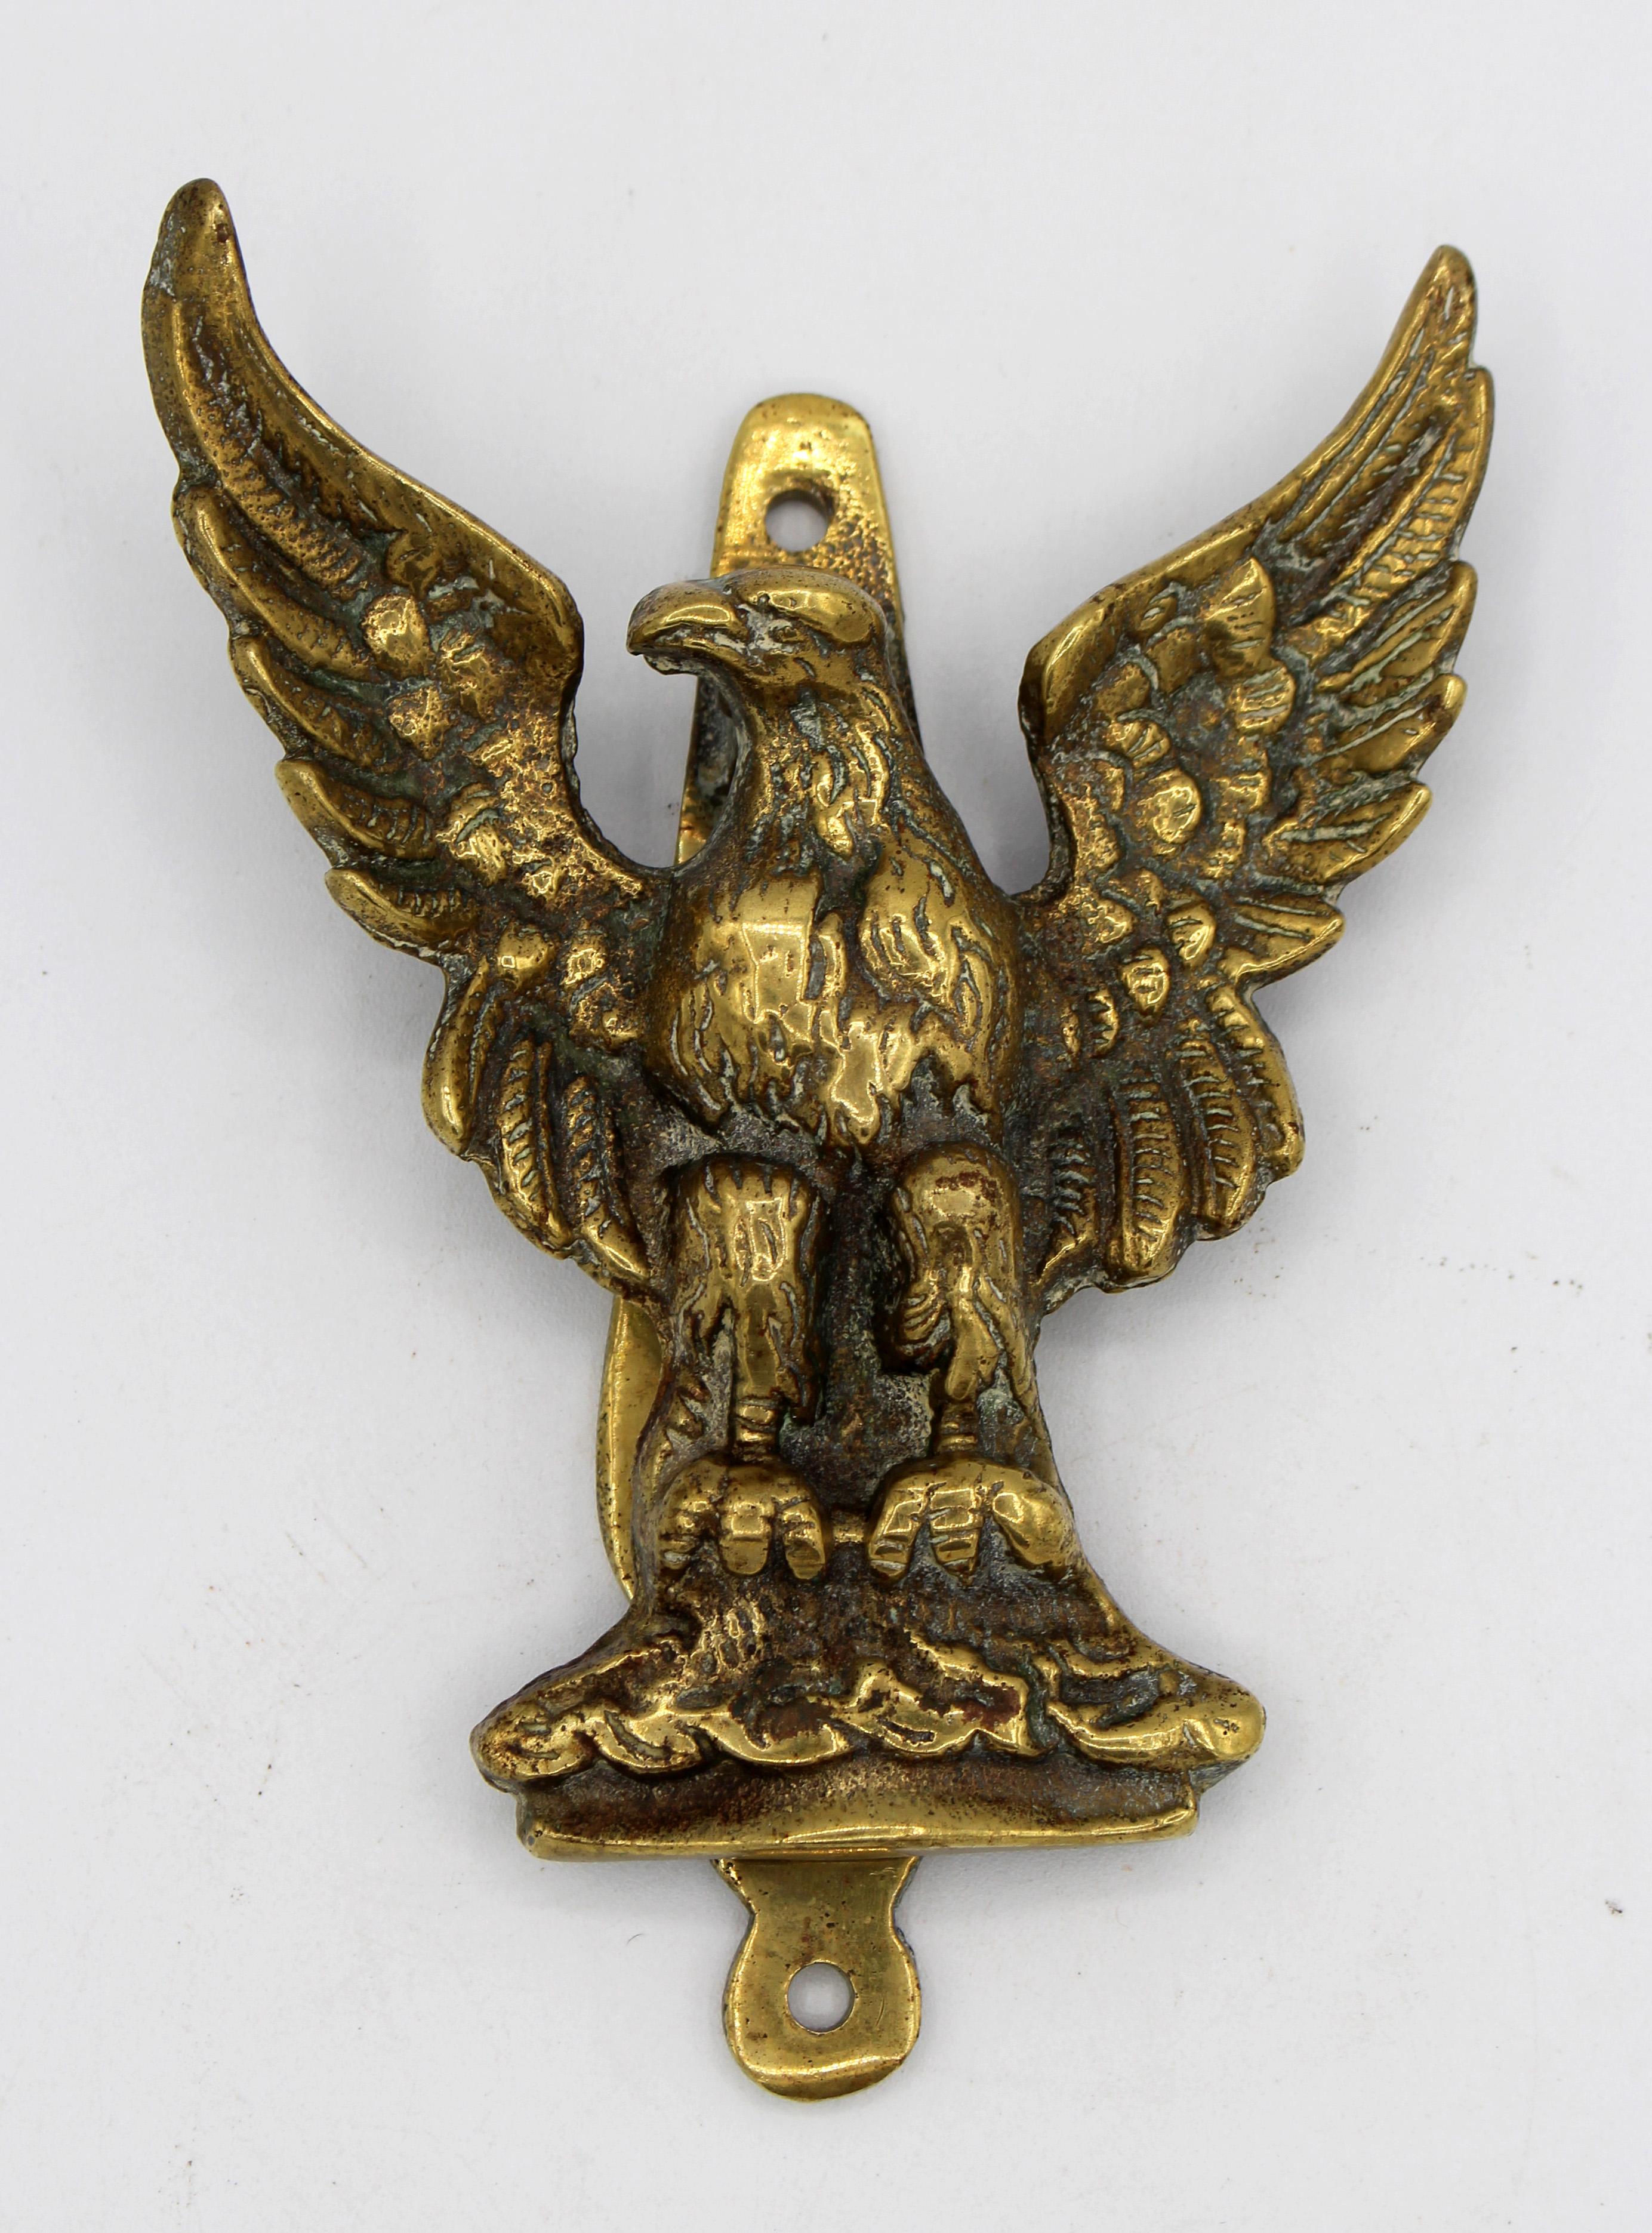 Early 20th century solid cast brass eagle door knocker, English. Very well modeled and good weight. 5